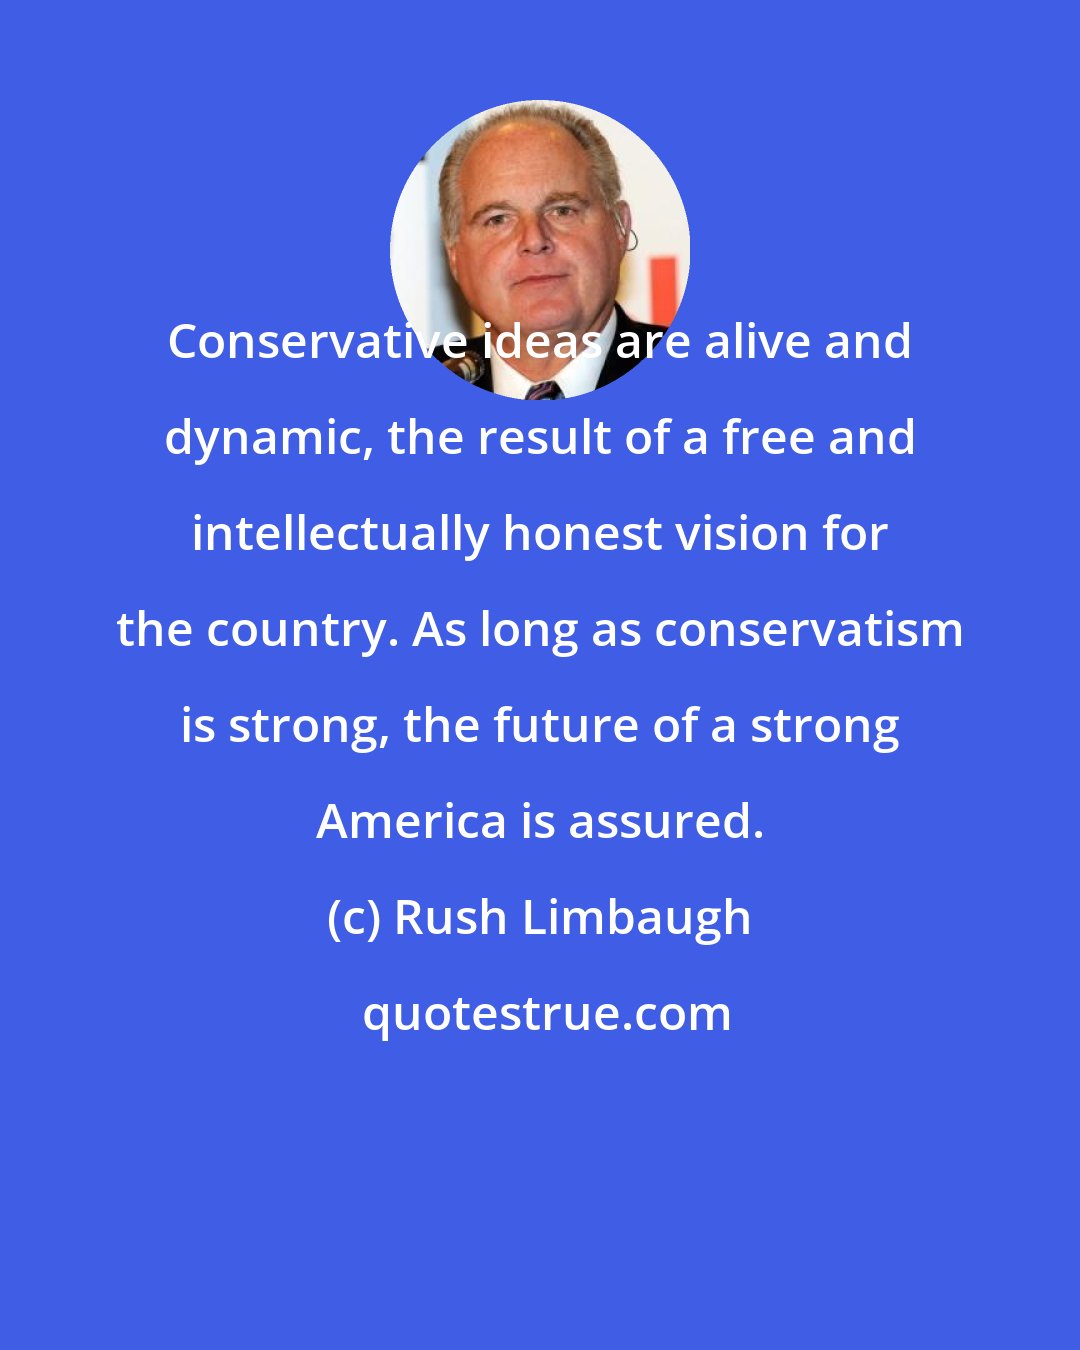 Rush Limbaugh: Conservative ideas are alive and dynamic, the result of a free and intellectually honest vision for the country. As long as conservatism is strong, the future of a strong America is assured.